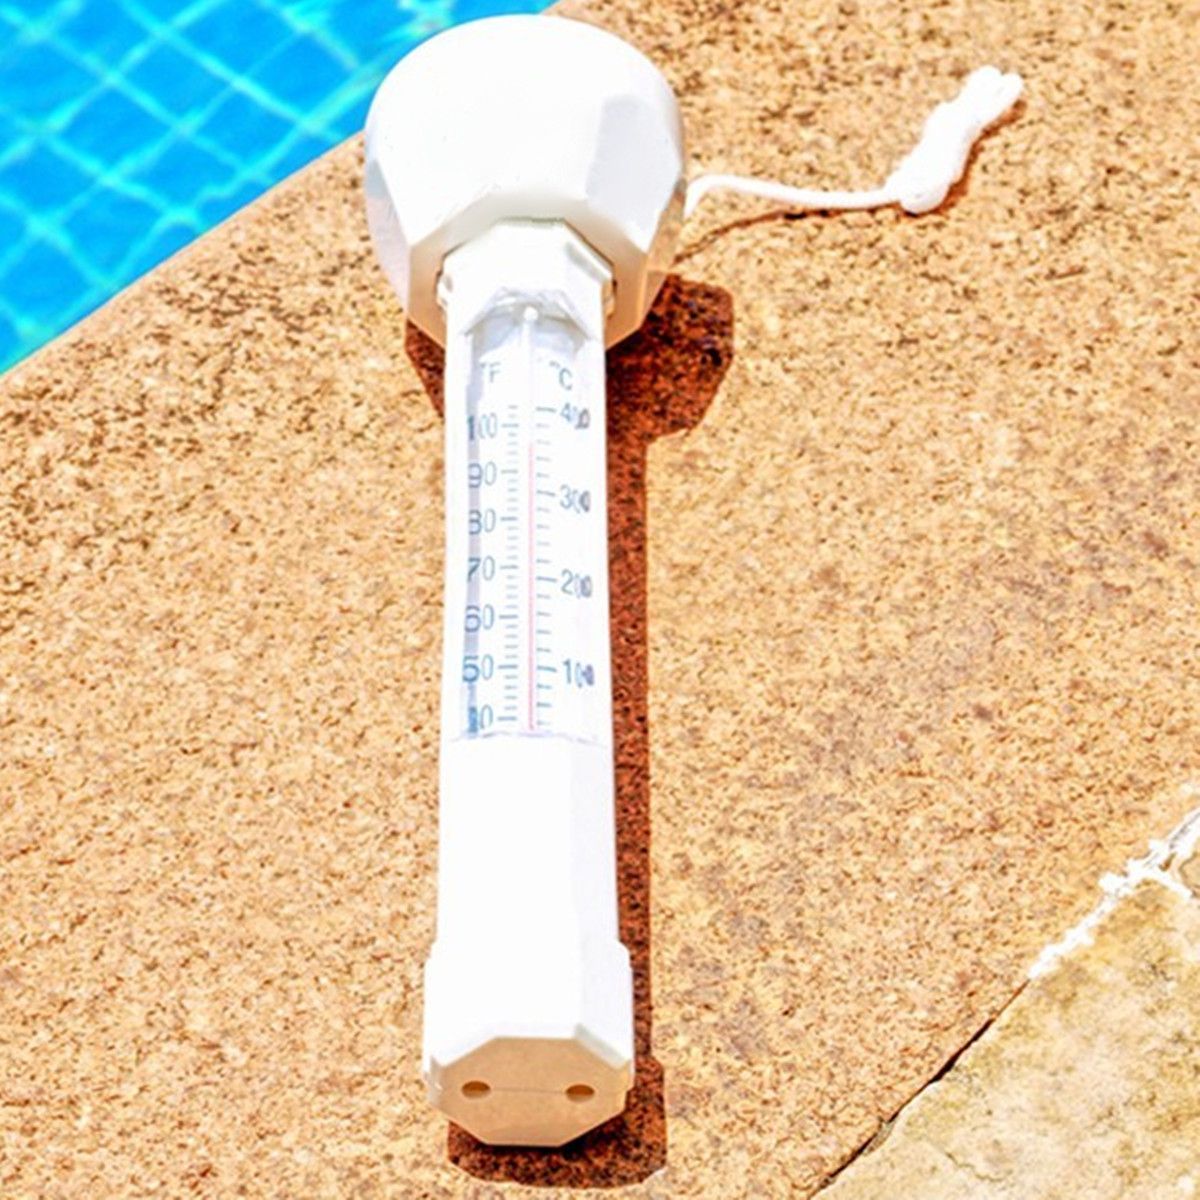 White-Floating-Water-Swimming-Pool-Bath-Spa-Hot-Tub-Temperature-Thermometer--1151459